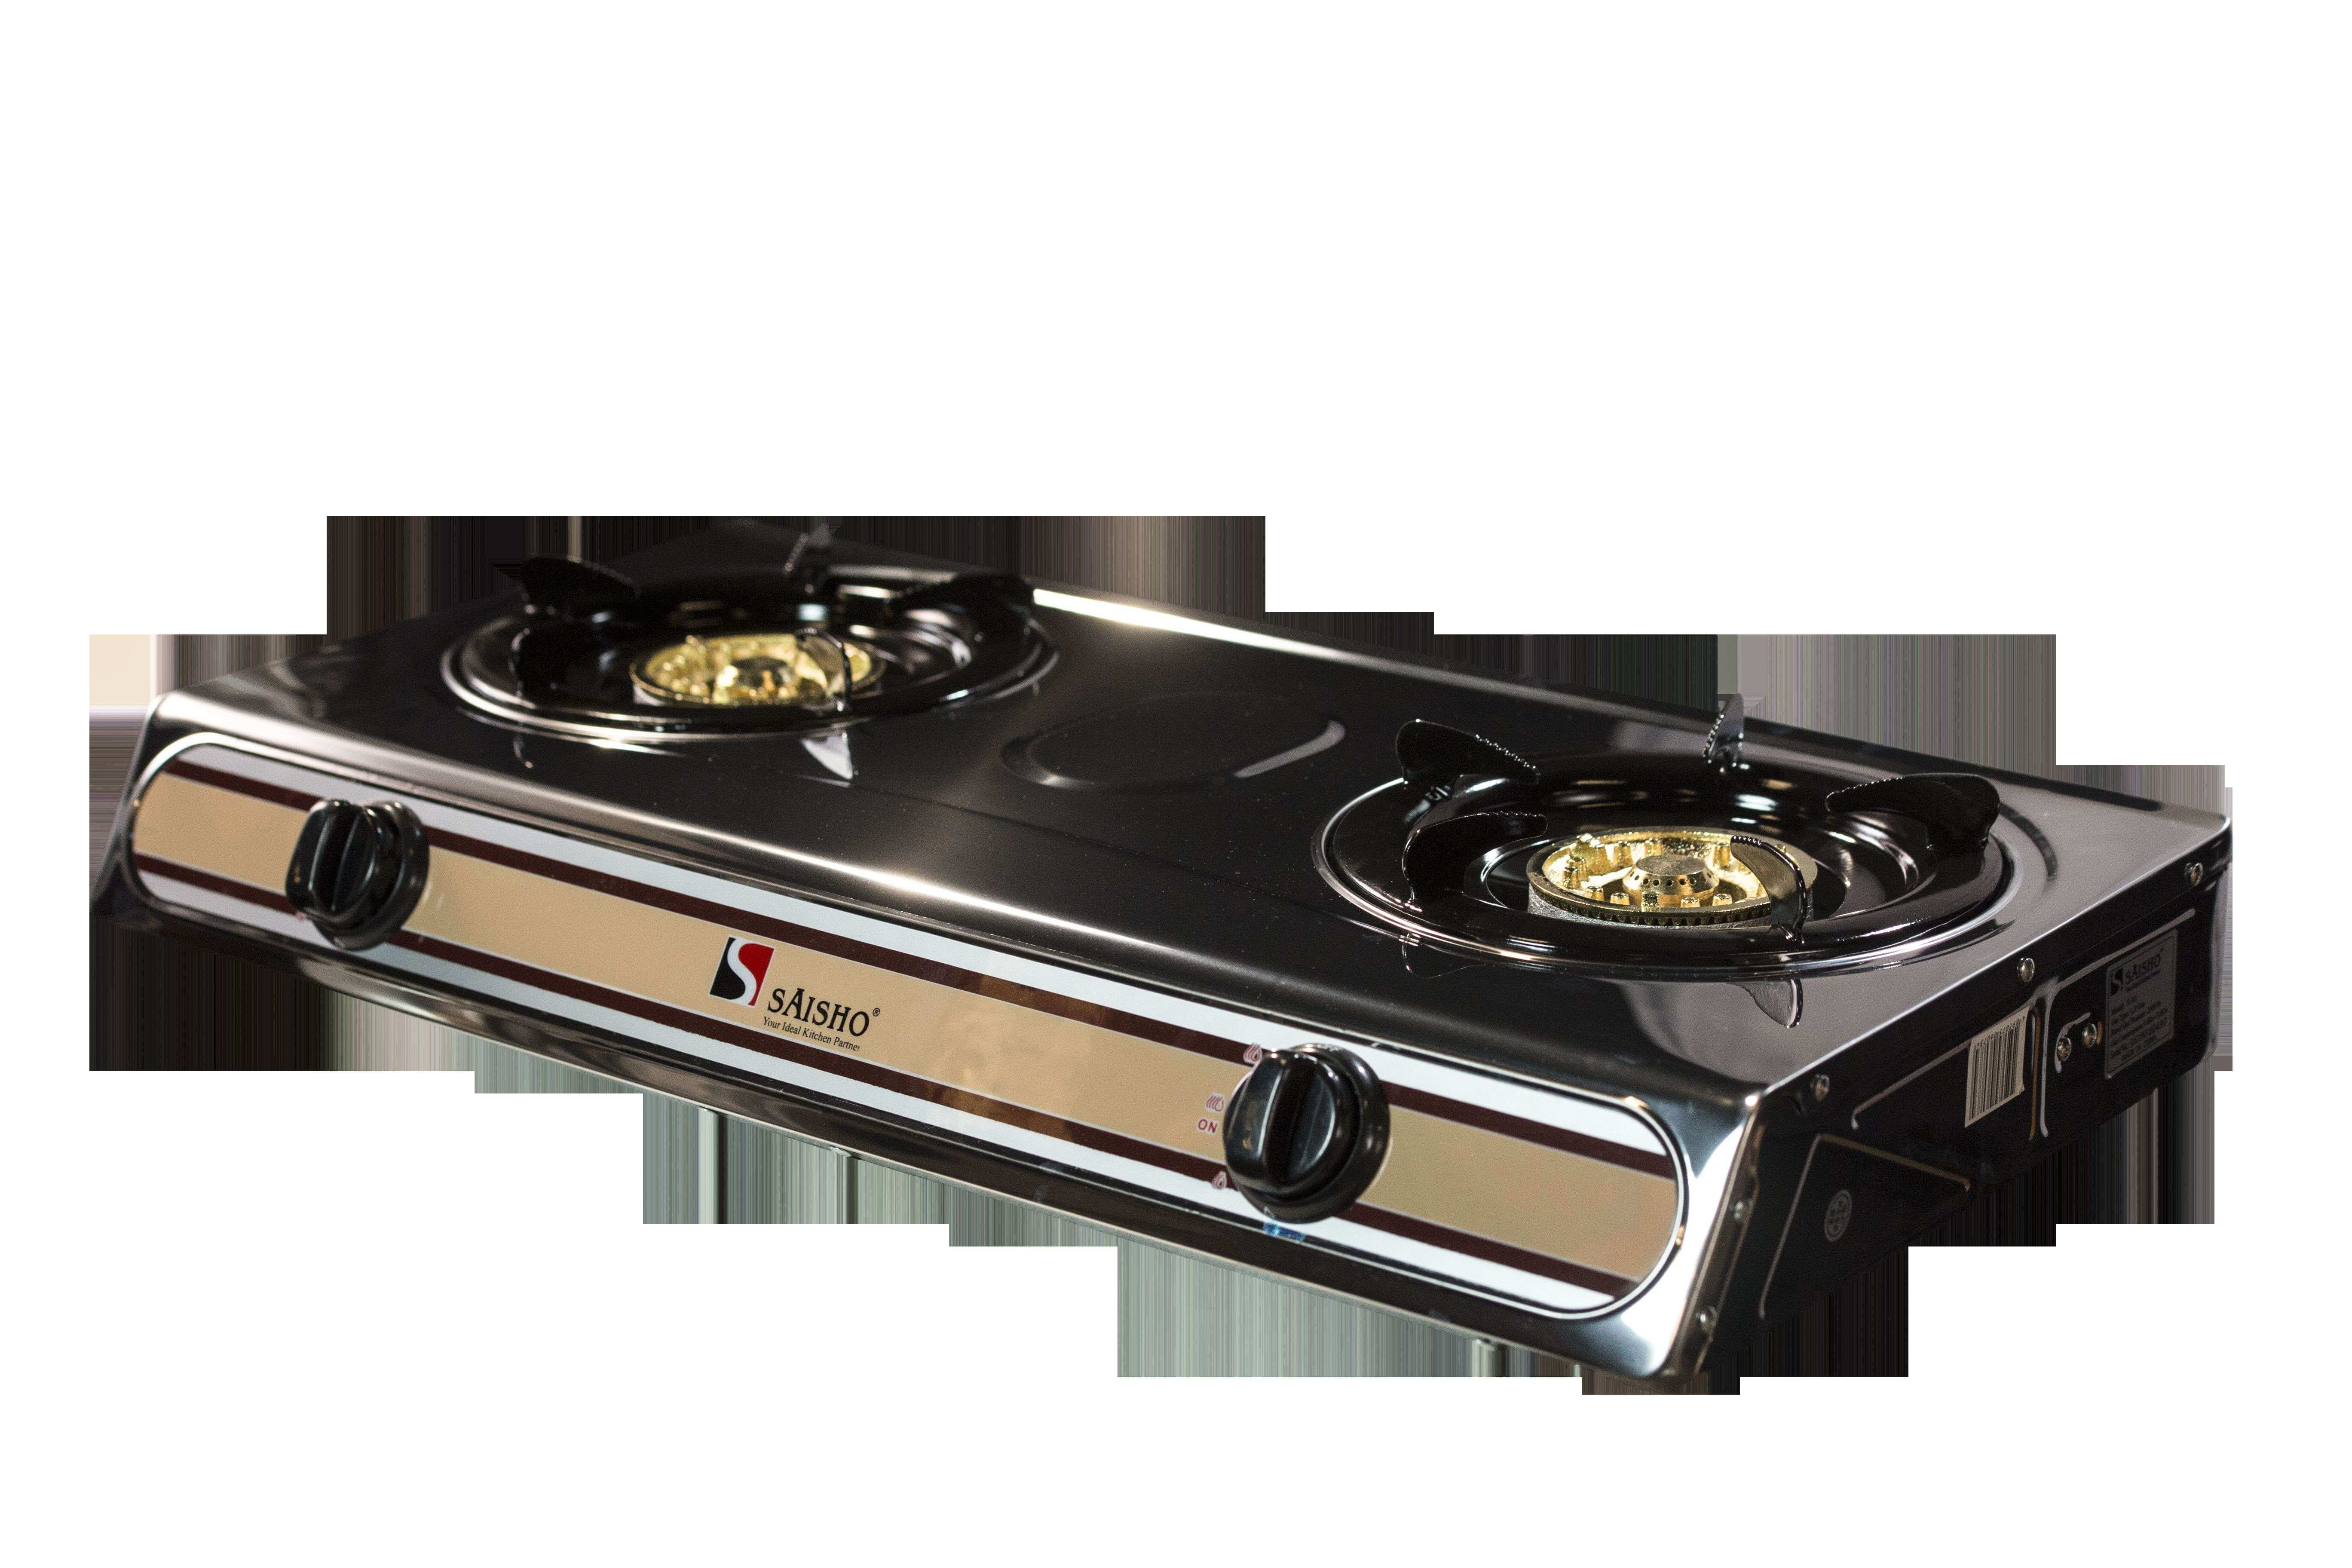 Best Two Burner Stove Ideas in 2022